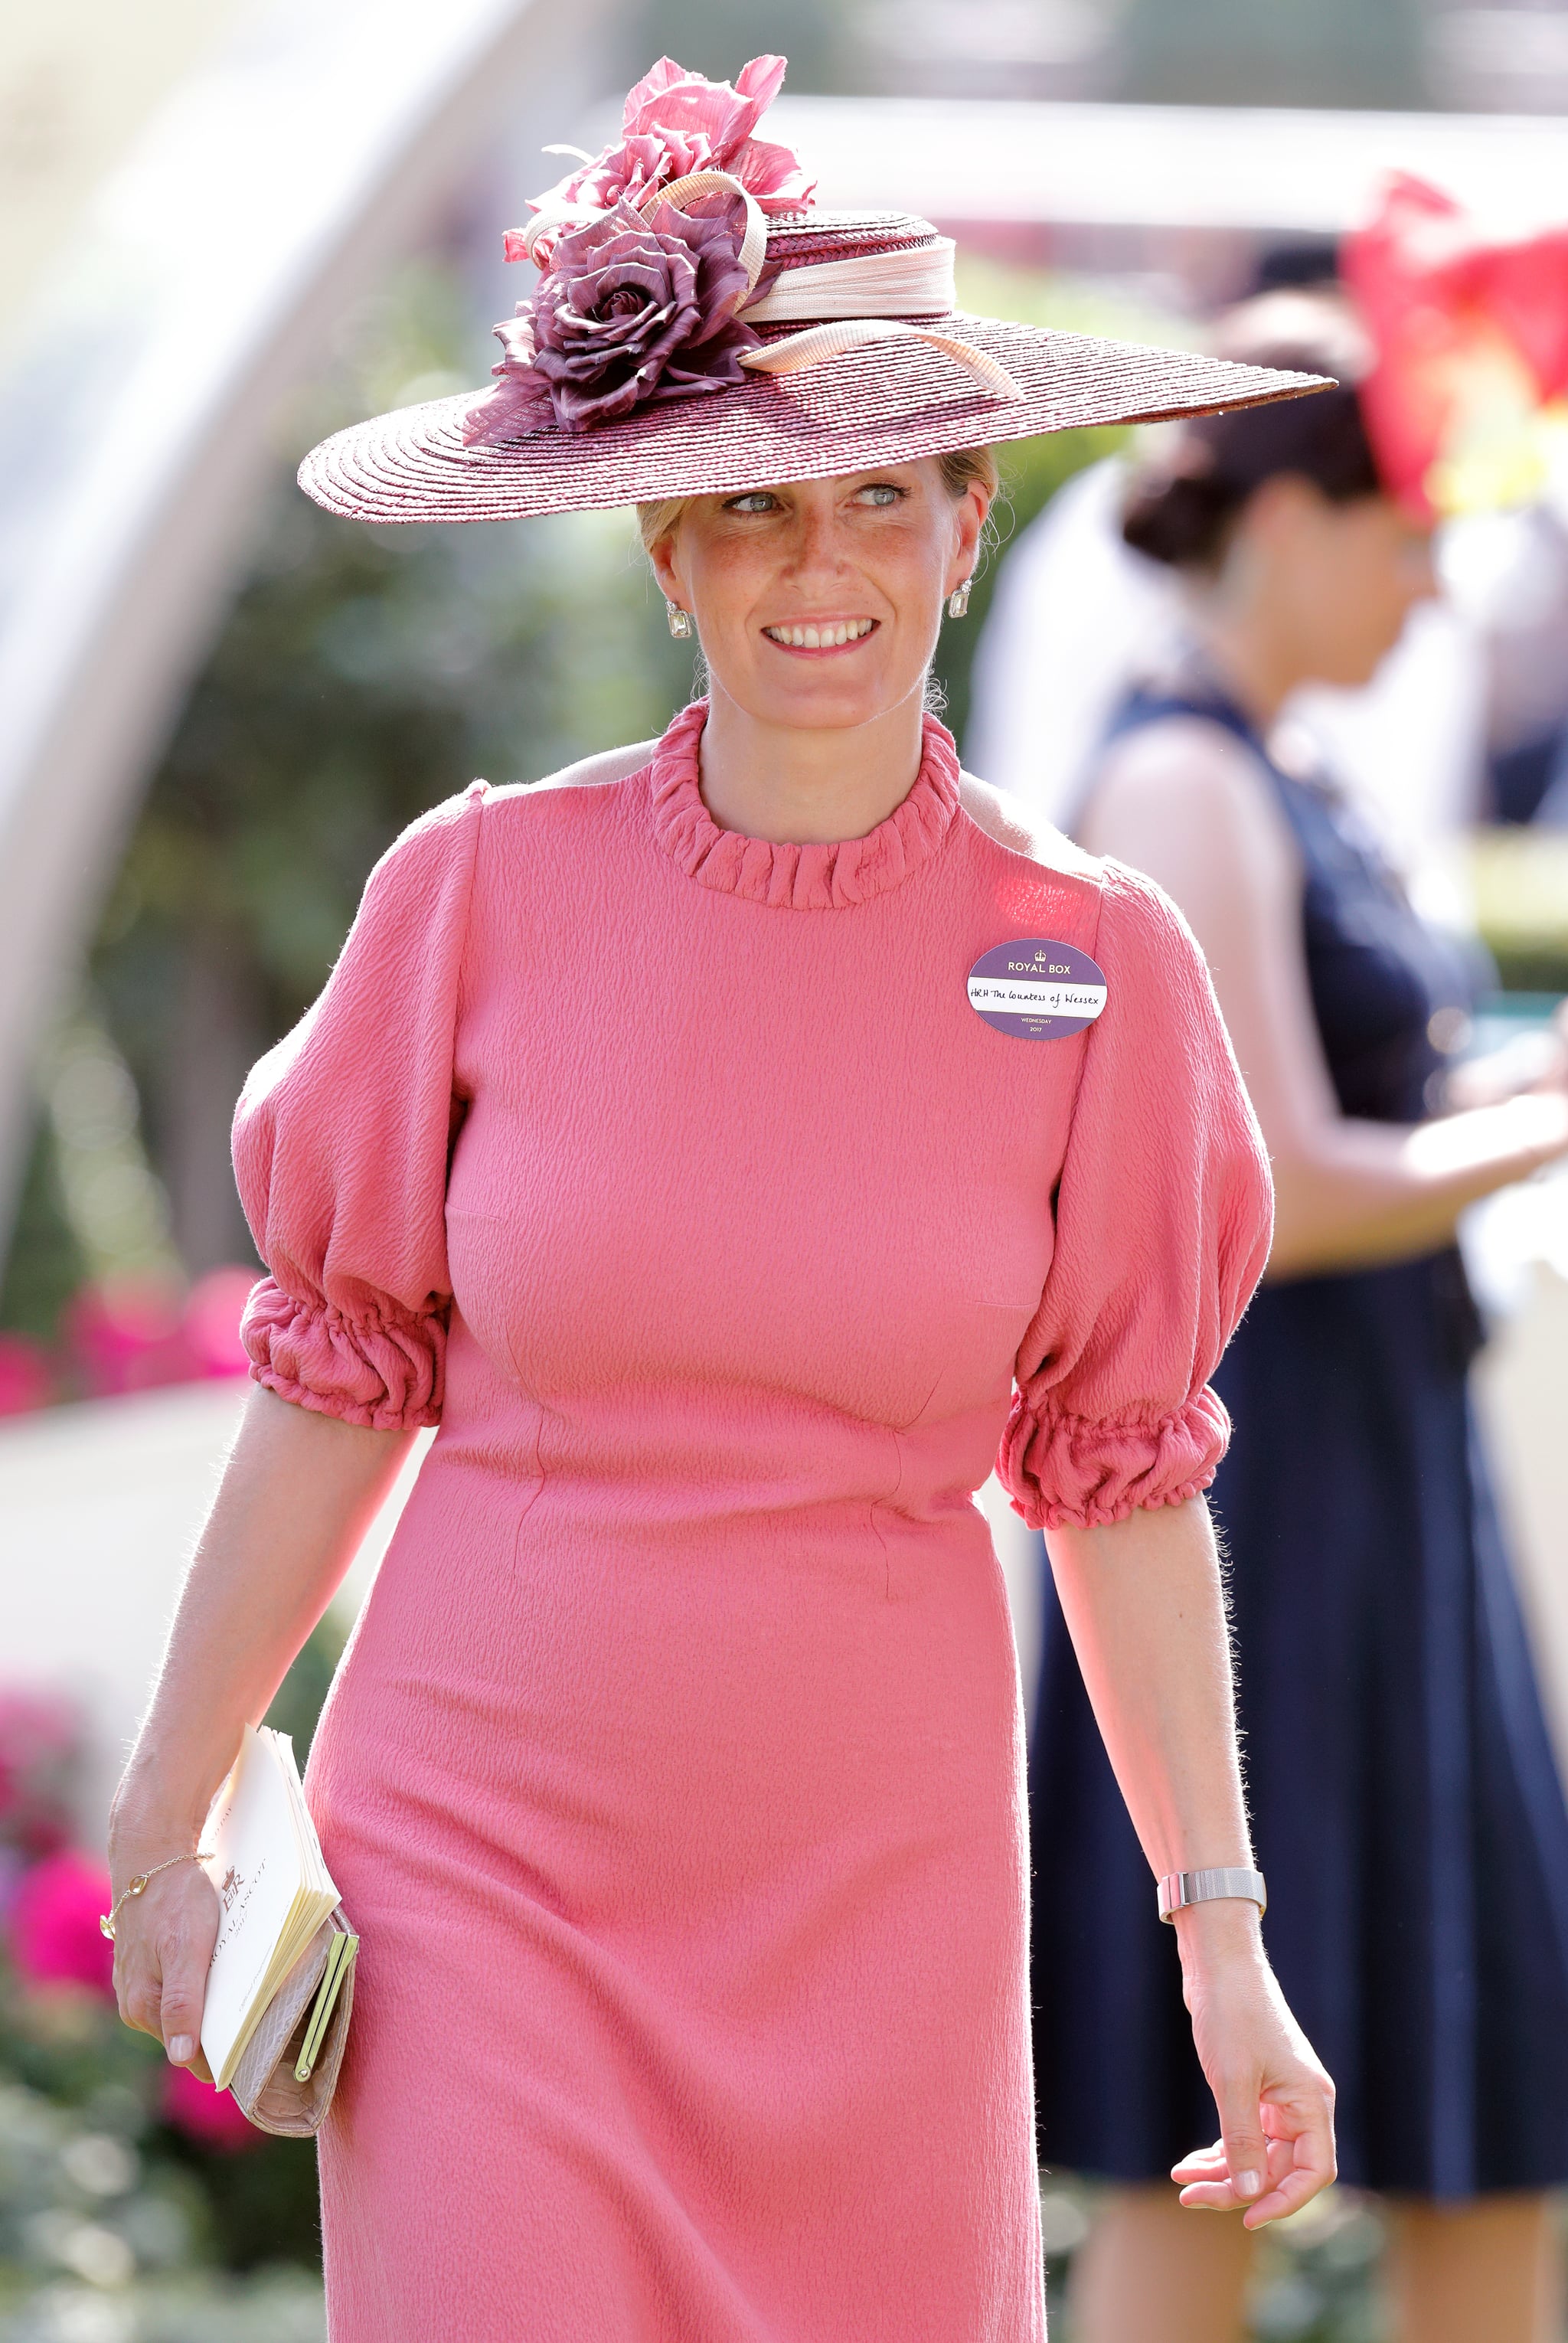 Sophie-Countess-Wessex-Royal-Ascot-2017.jpg